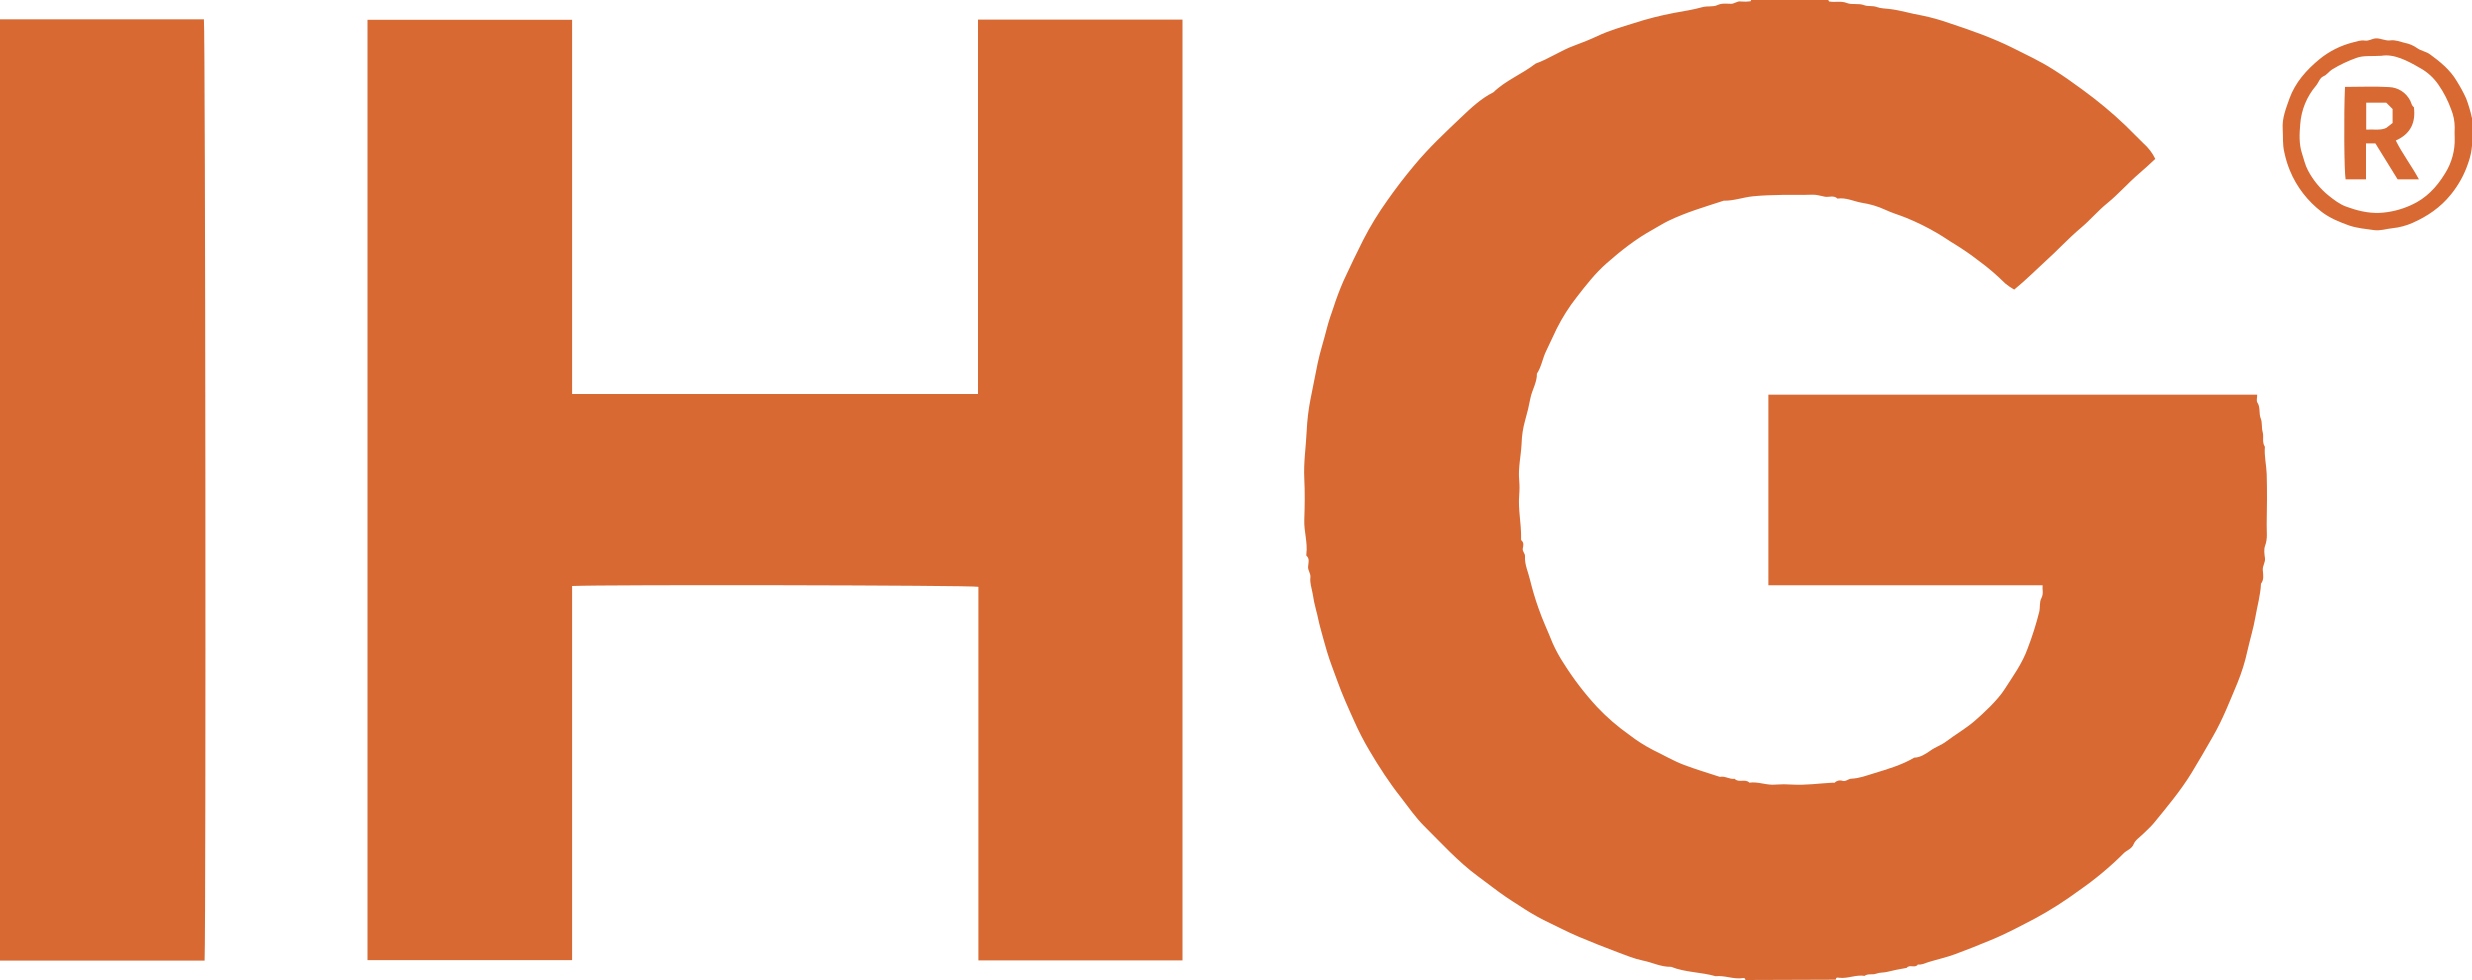 InterContinental Hotels Group logo colors